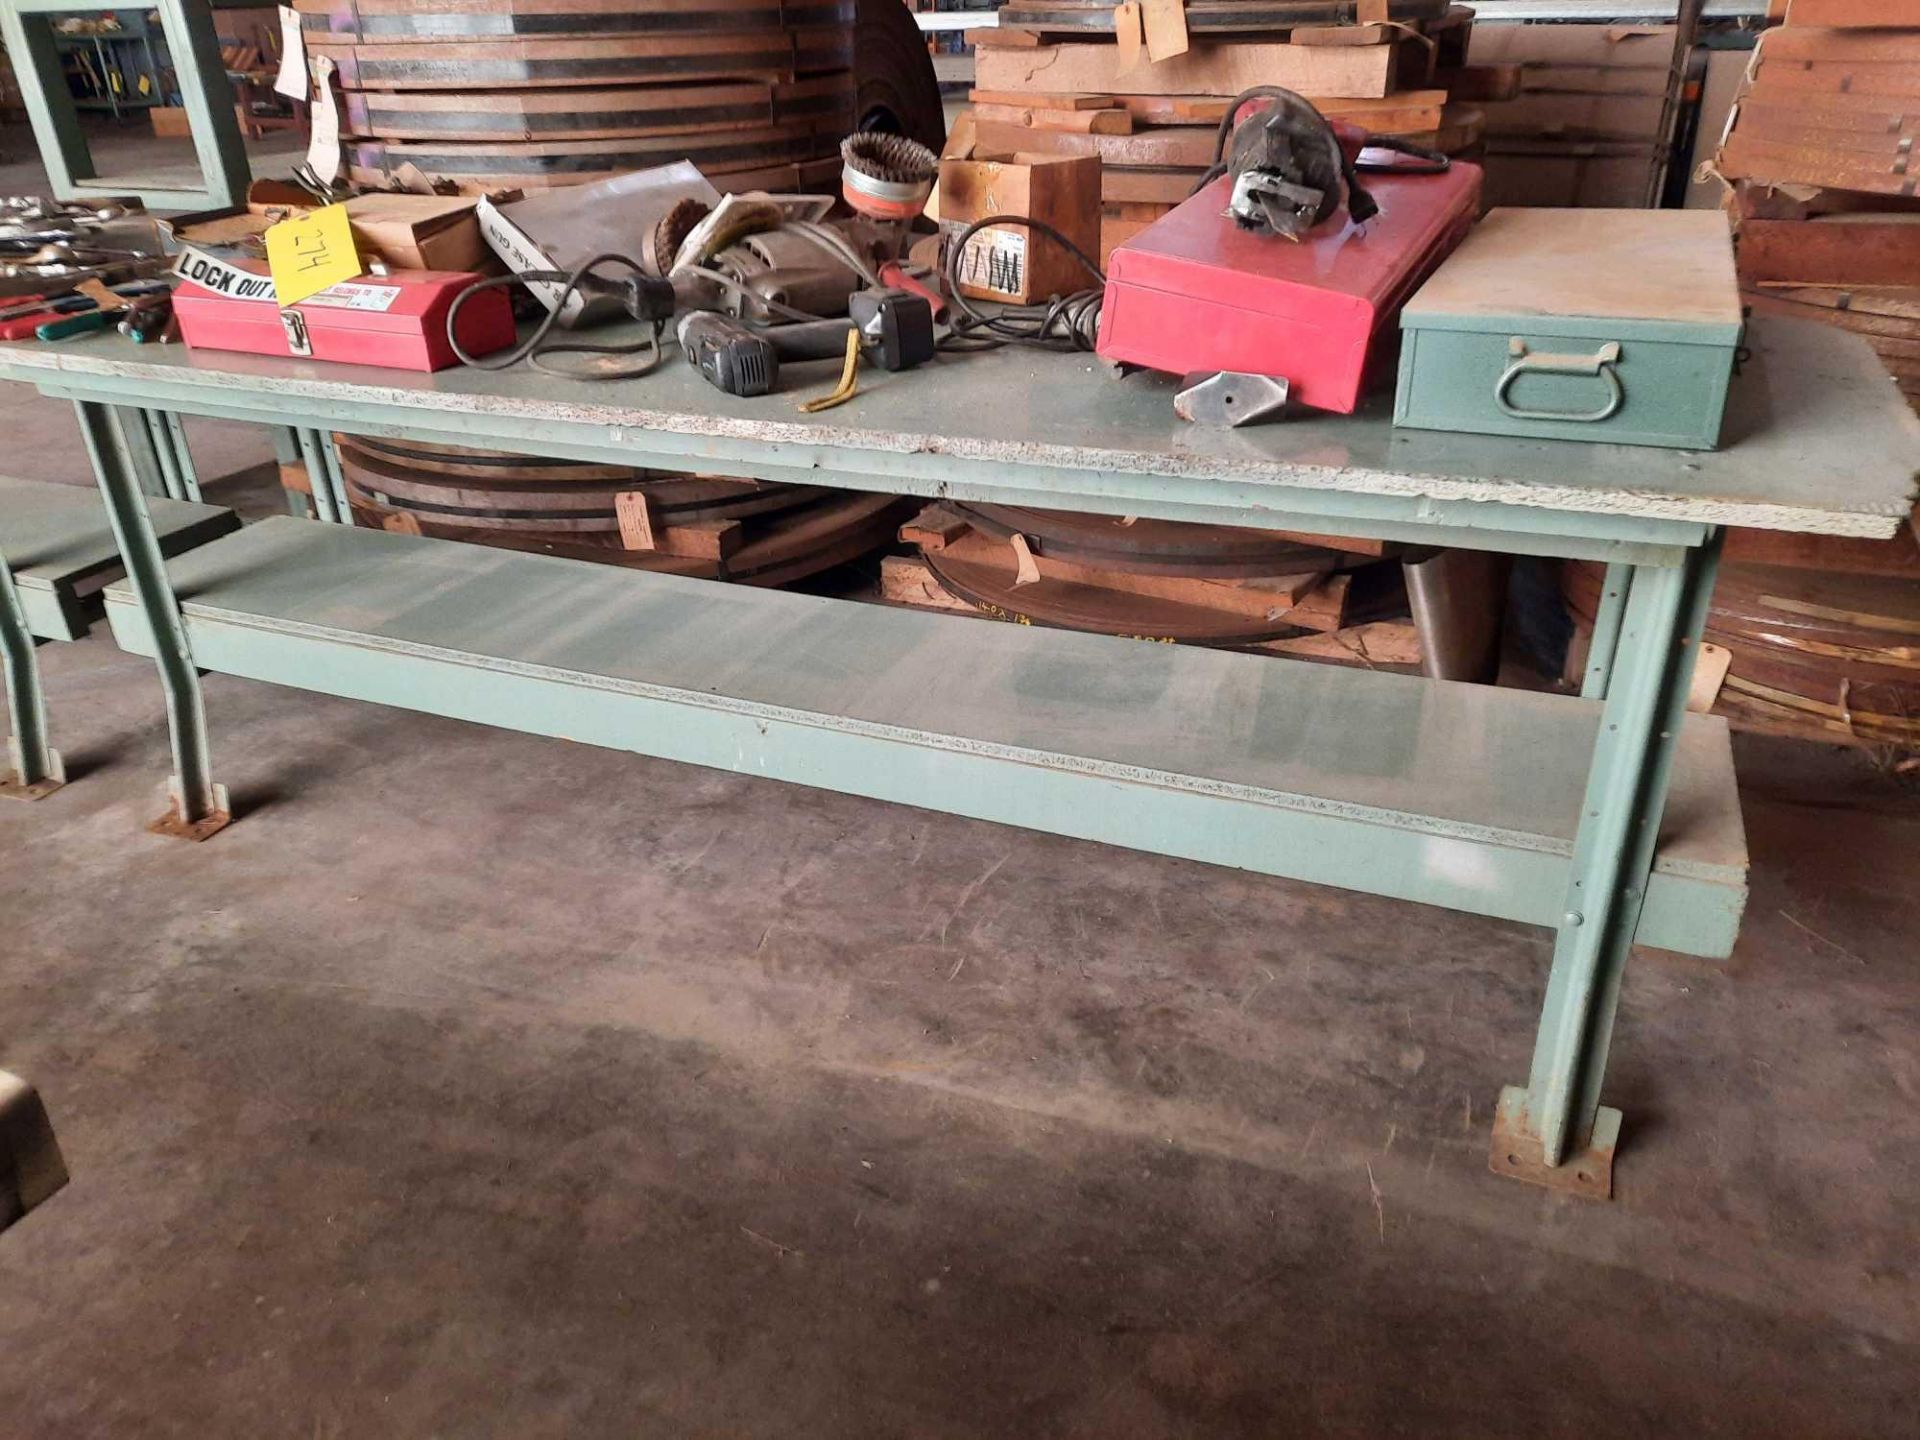 Metal leg work bench with wood top and lower shelf, 96 x 33 x 33 inches (contents not included)